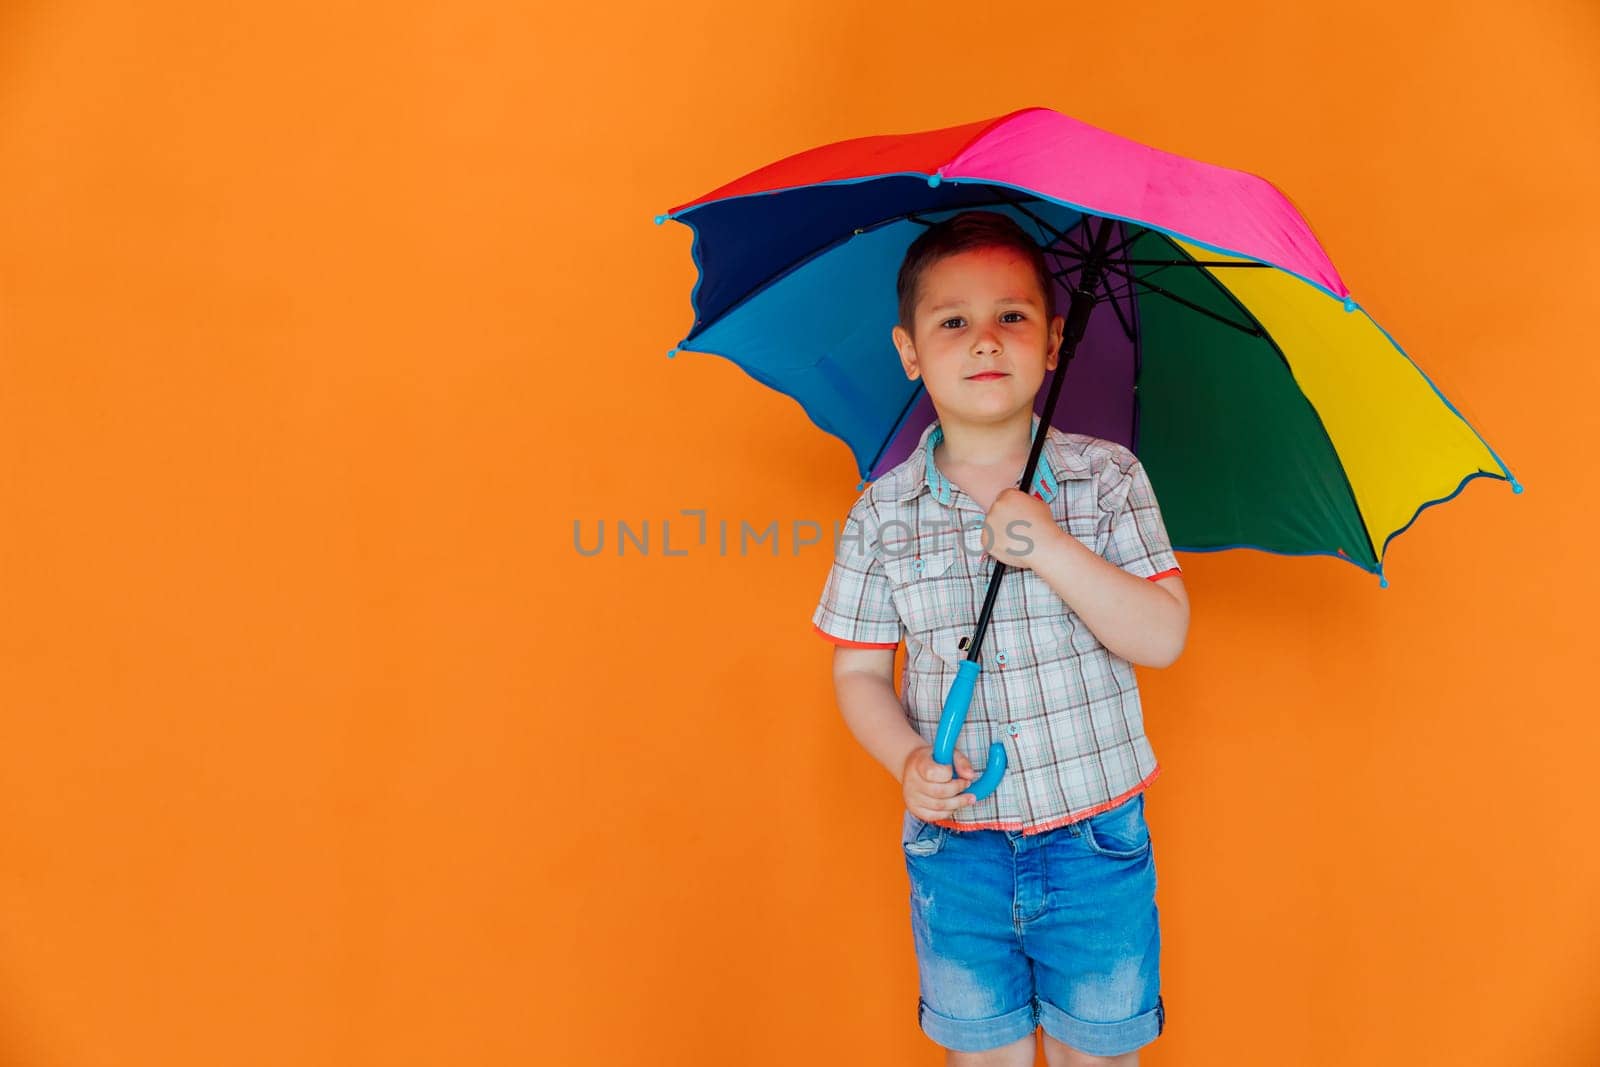 Little boy with colorful umbrella on orange background by Simakov